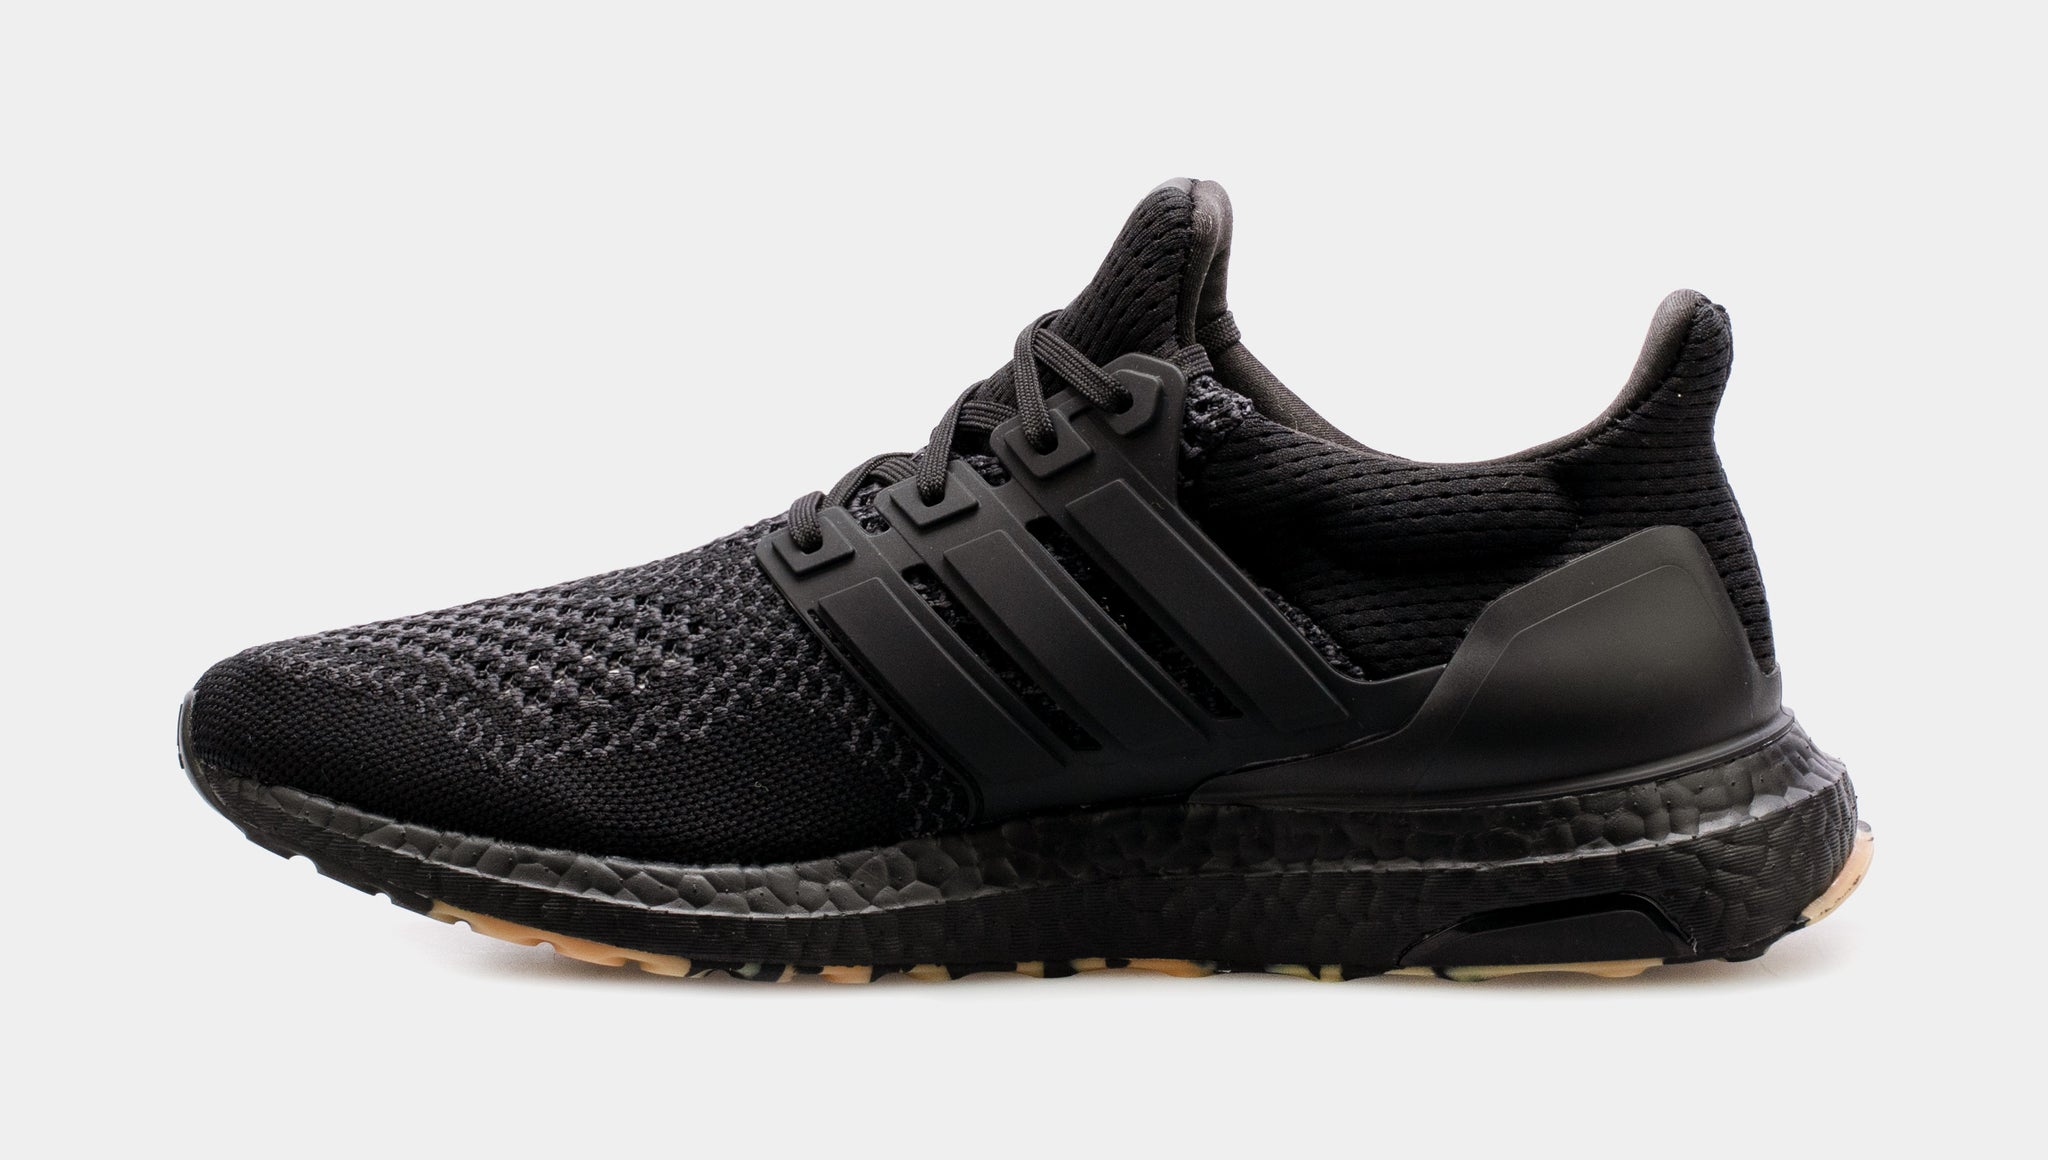 adidas Ultraboost 1.0 Mens Running Shoes Black GY9136 – Shoe Palace